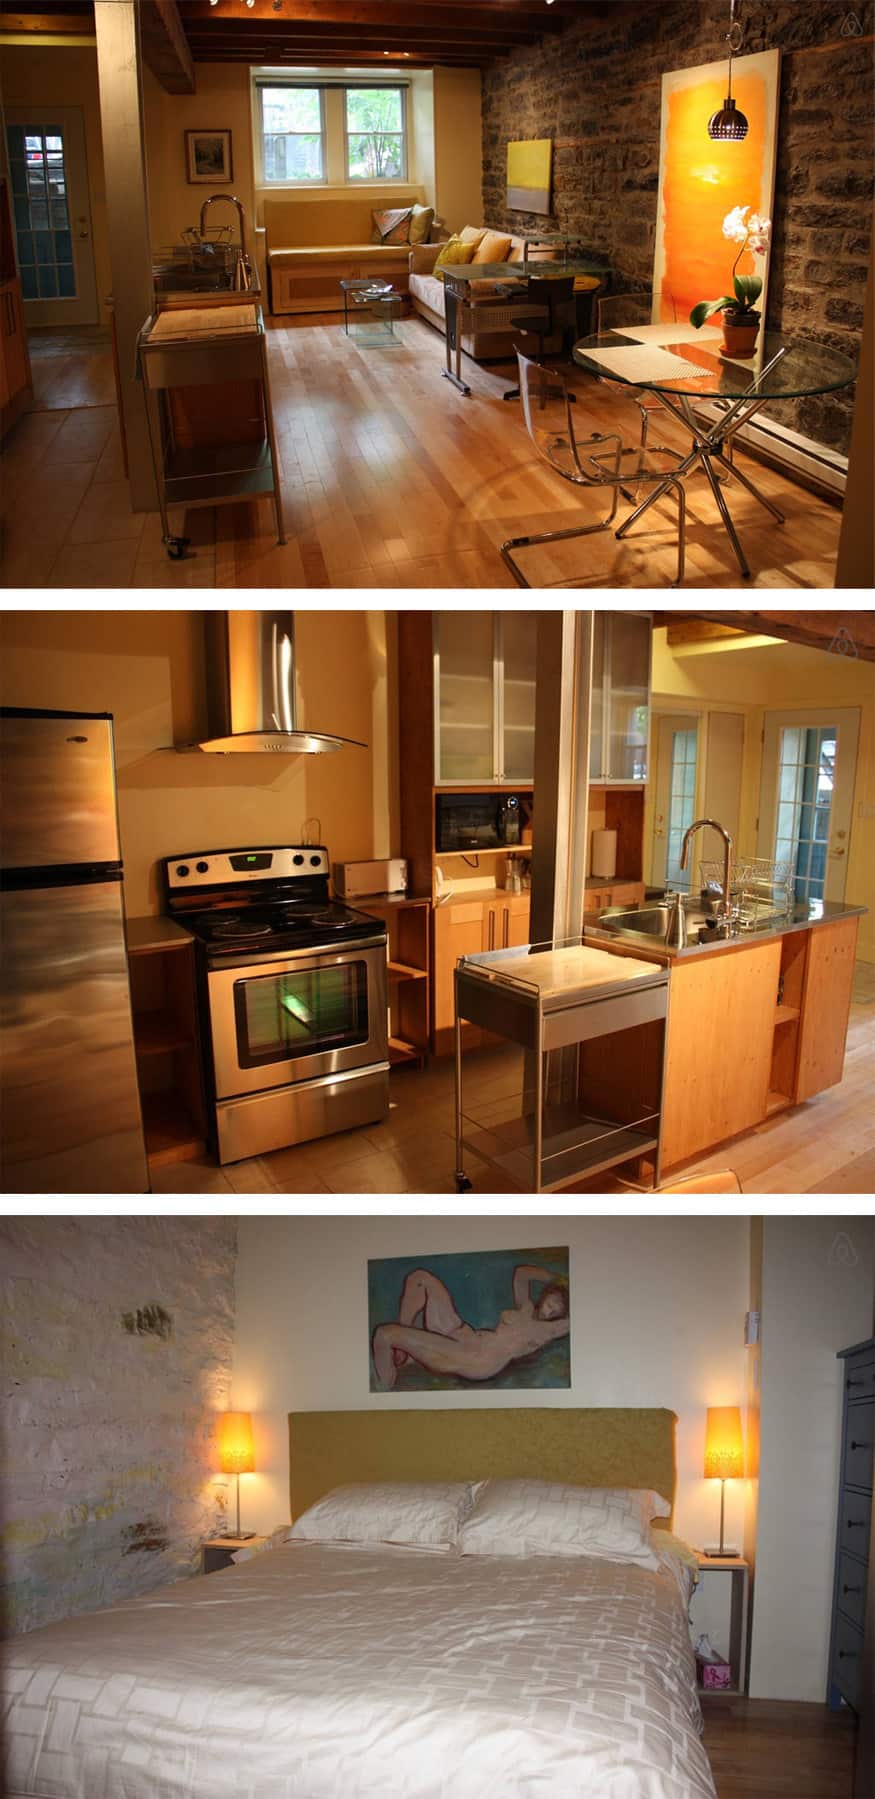 Montreal. A year of Airbnb apartments